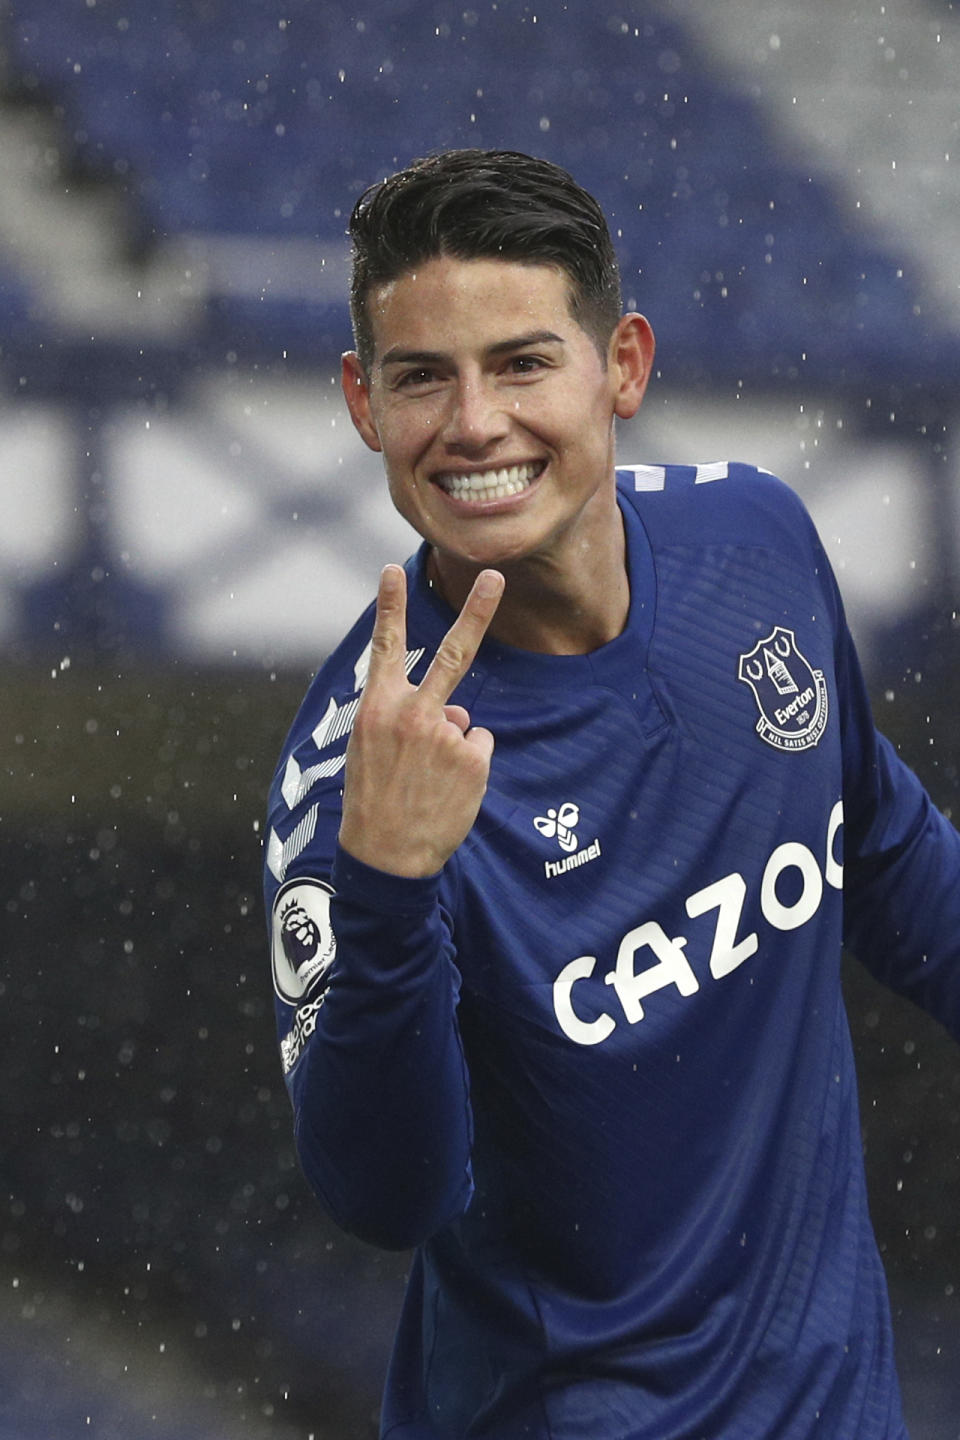 Everton's James Rodriguez celebrates after scoring his side's fourth goal during the English Premier League soccer match between Everton and Brighton at the Goodison Park stadium in Liverpool, England, Saturday, Oct. 3, 2020. (Jan Kruger/Pool via AP)